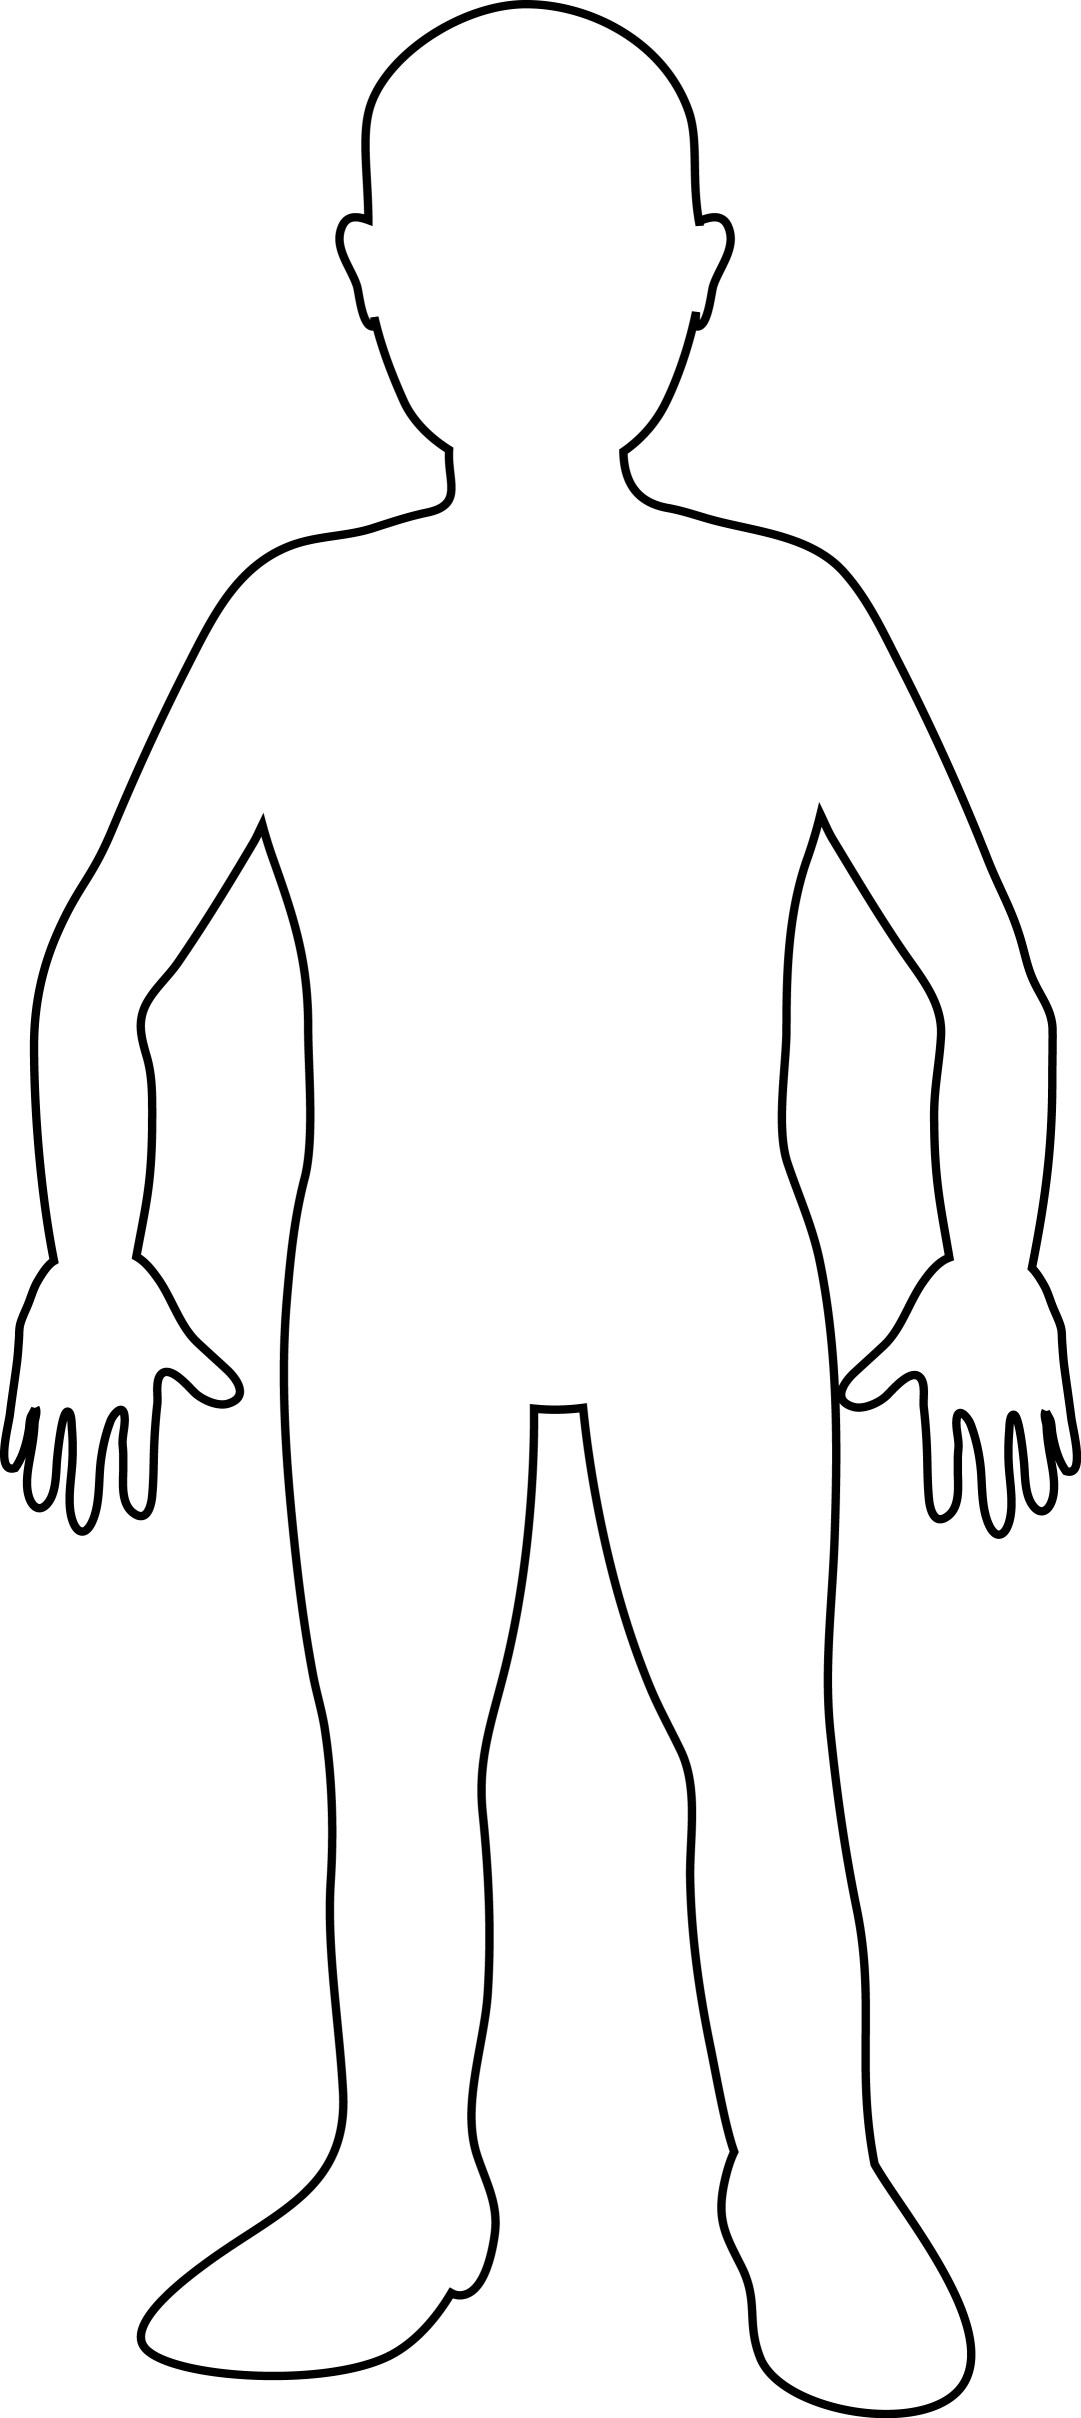 Blank Person Template - ClipArt Best